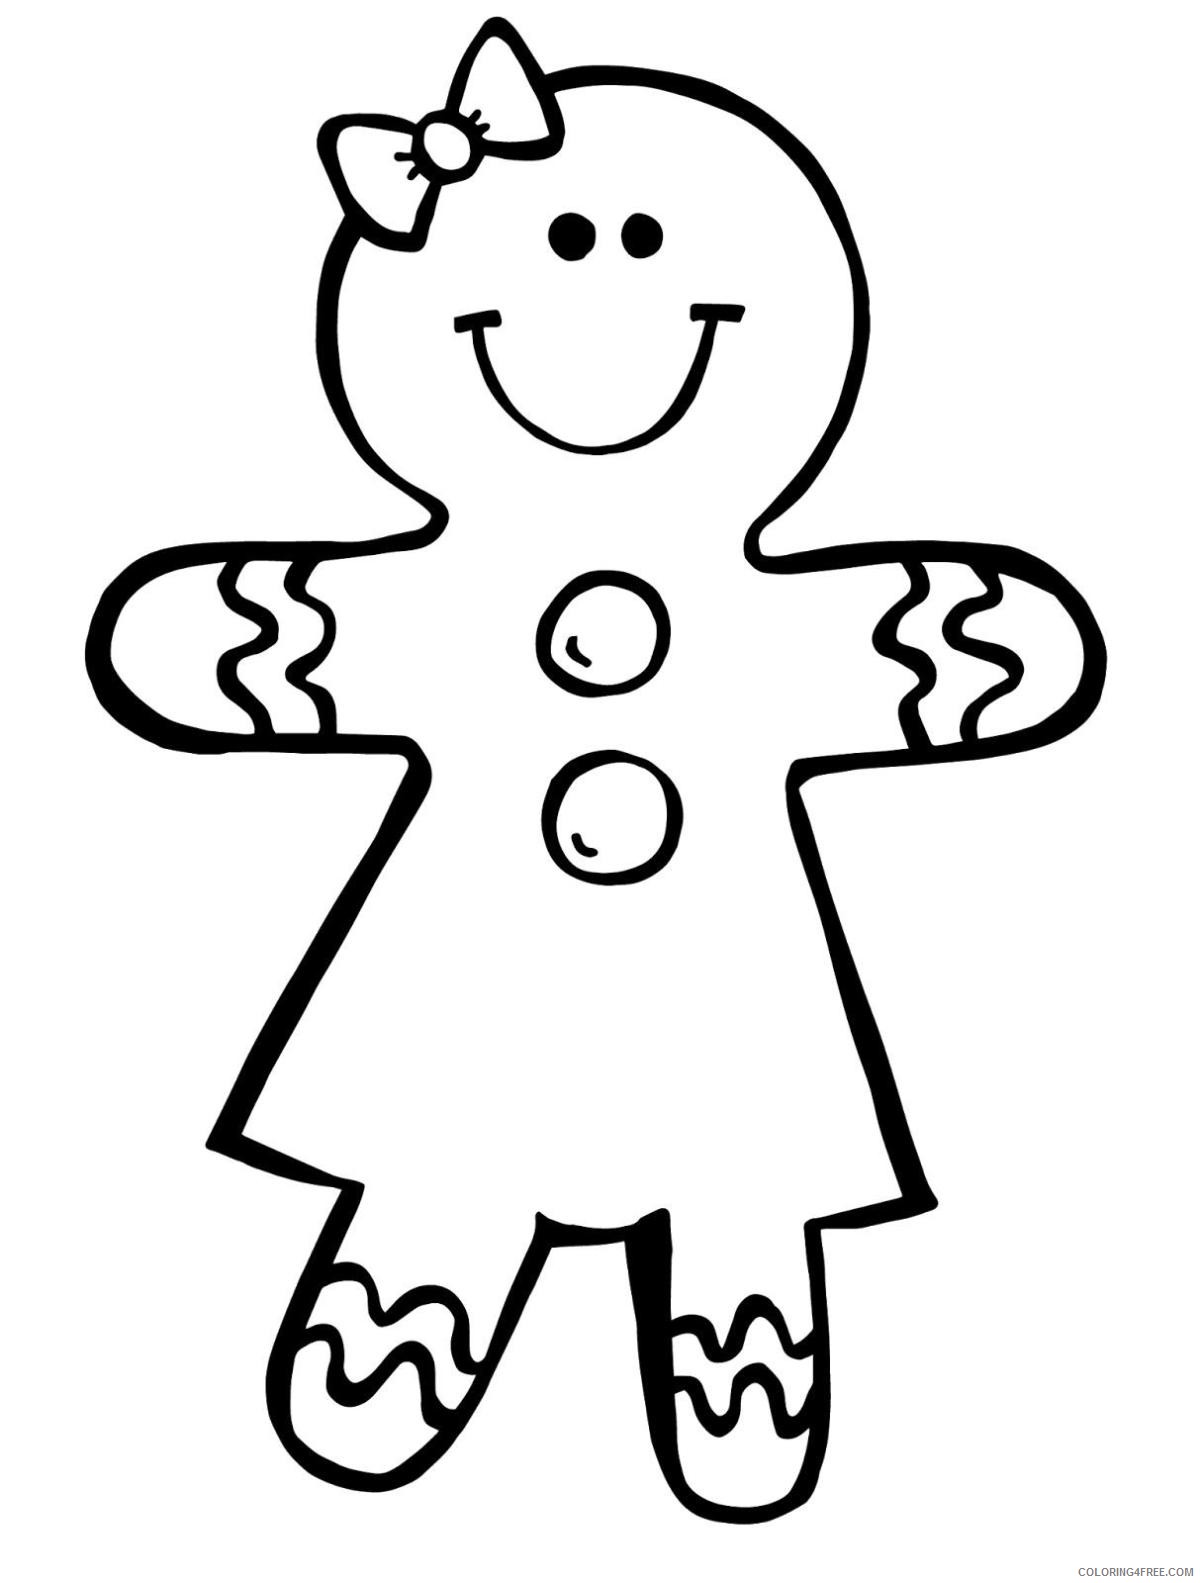 Gingerbread Man Coloring Pages For Girls Coloring4free Coloring4free Com